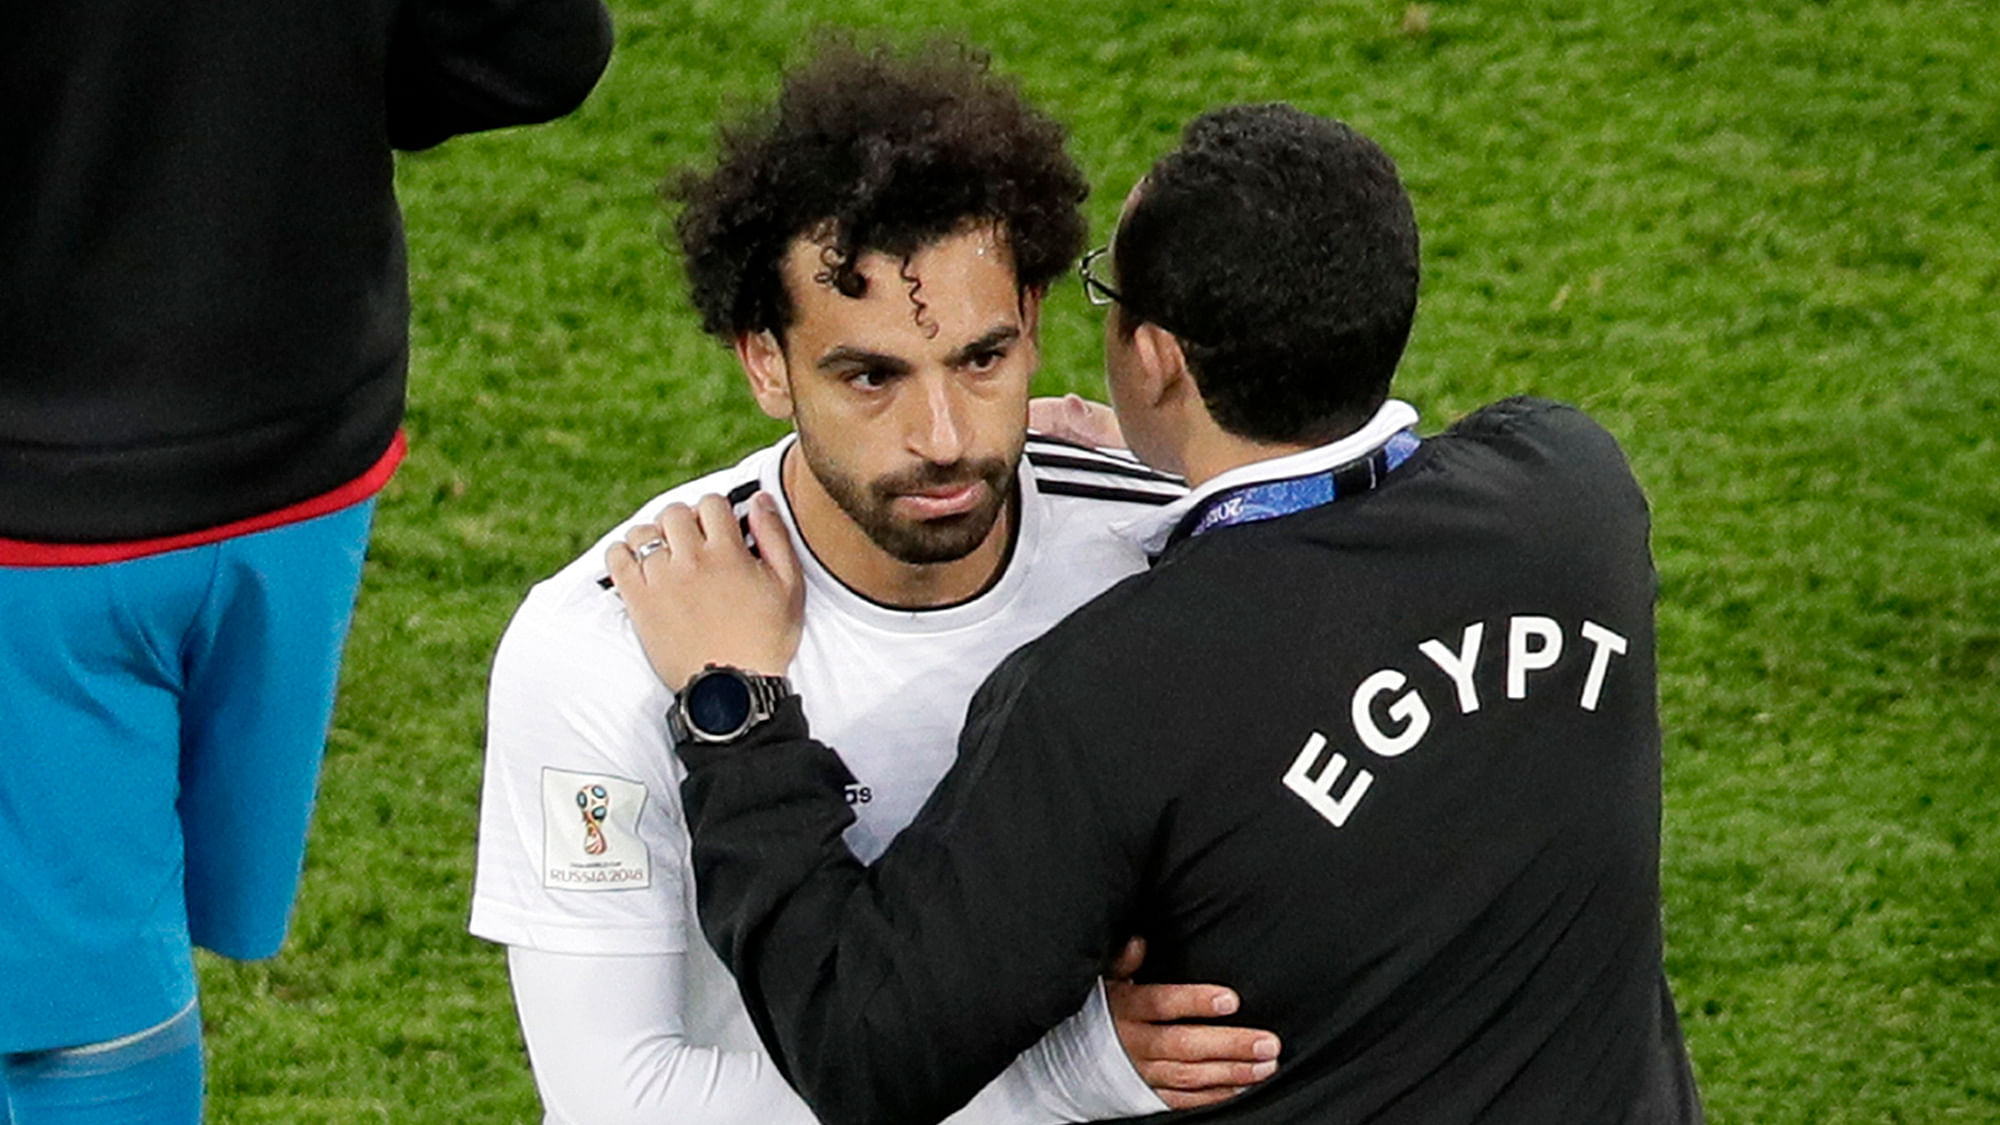 A Egypt’s team official comforts Egypt’s Mohamed Salah after the group A match between Russia and Egypt at the 2018 soccer World Cup in the St. Petersburg stadium in St. Petersburg, Russia, Tuesday, June 19, 2018.